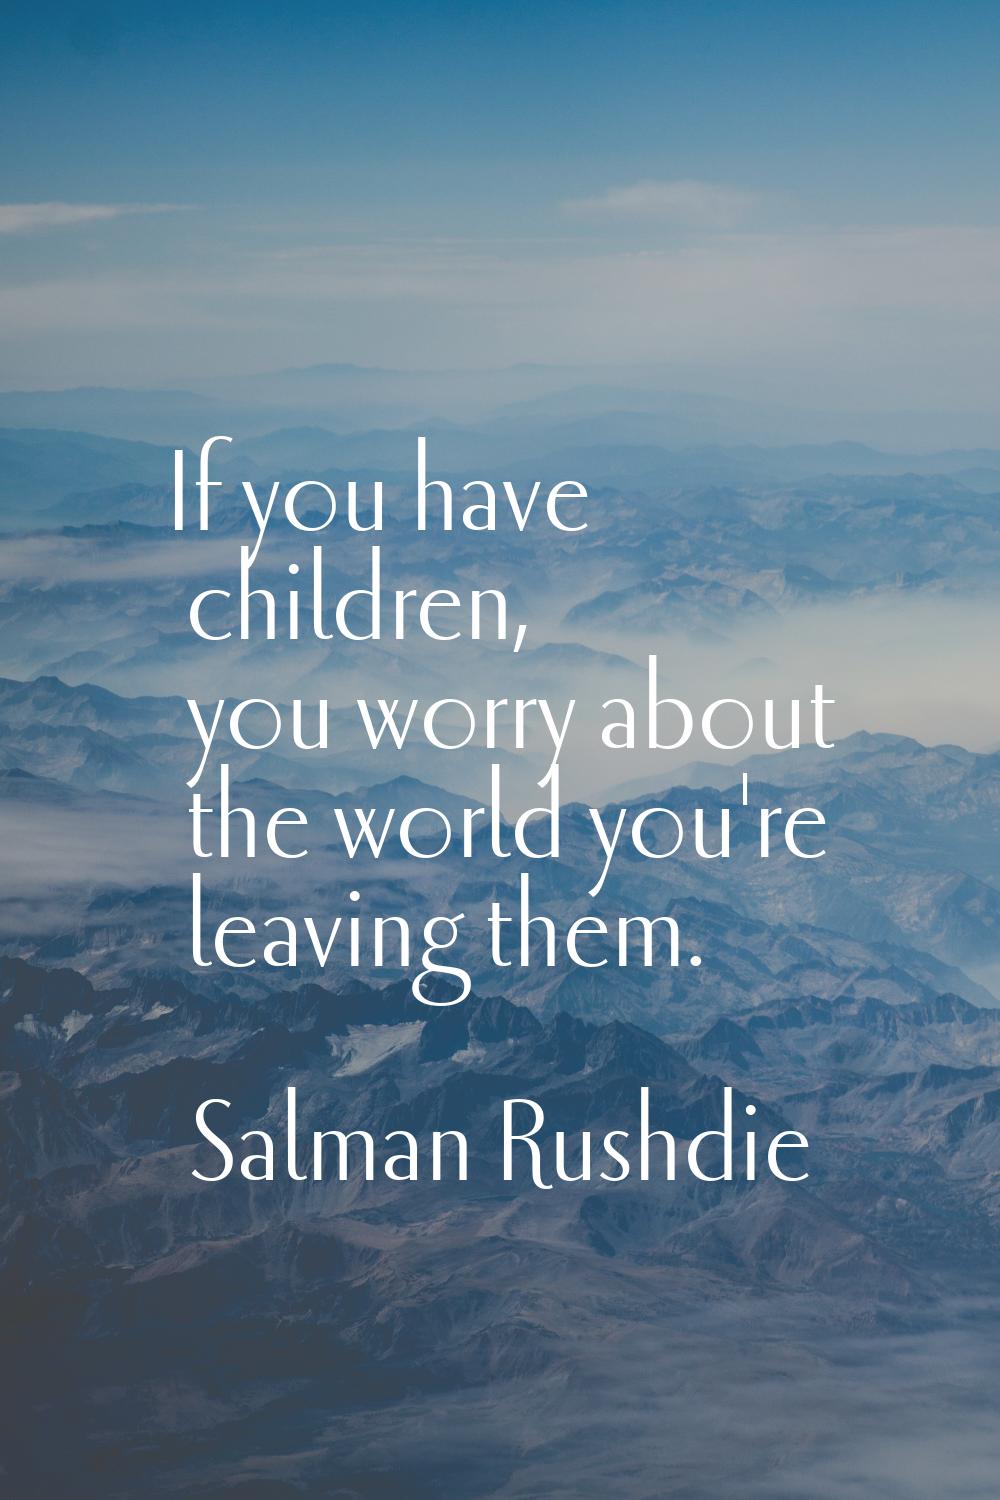 If you have children, you worry about the world you're leaving them.